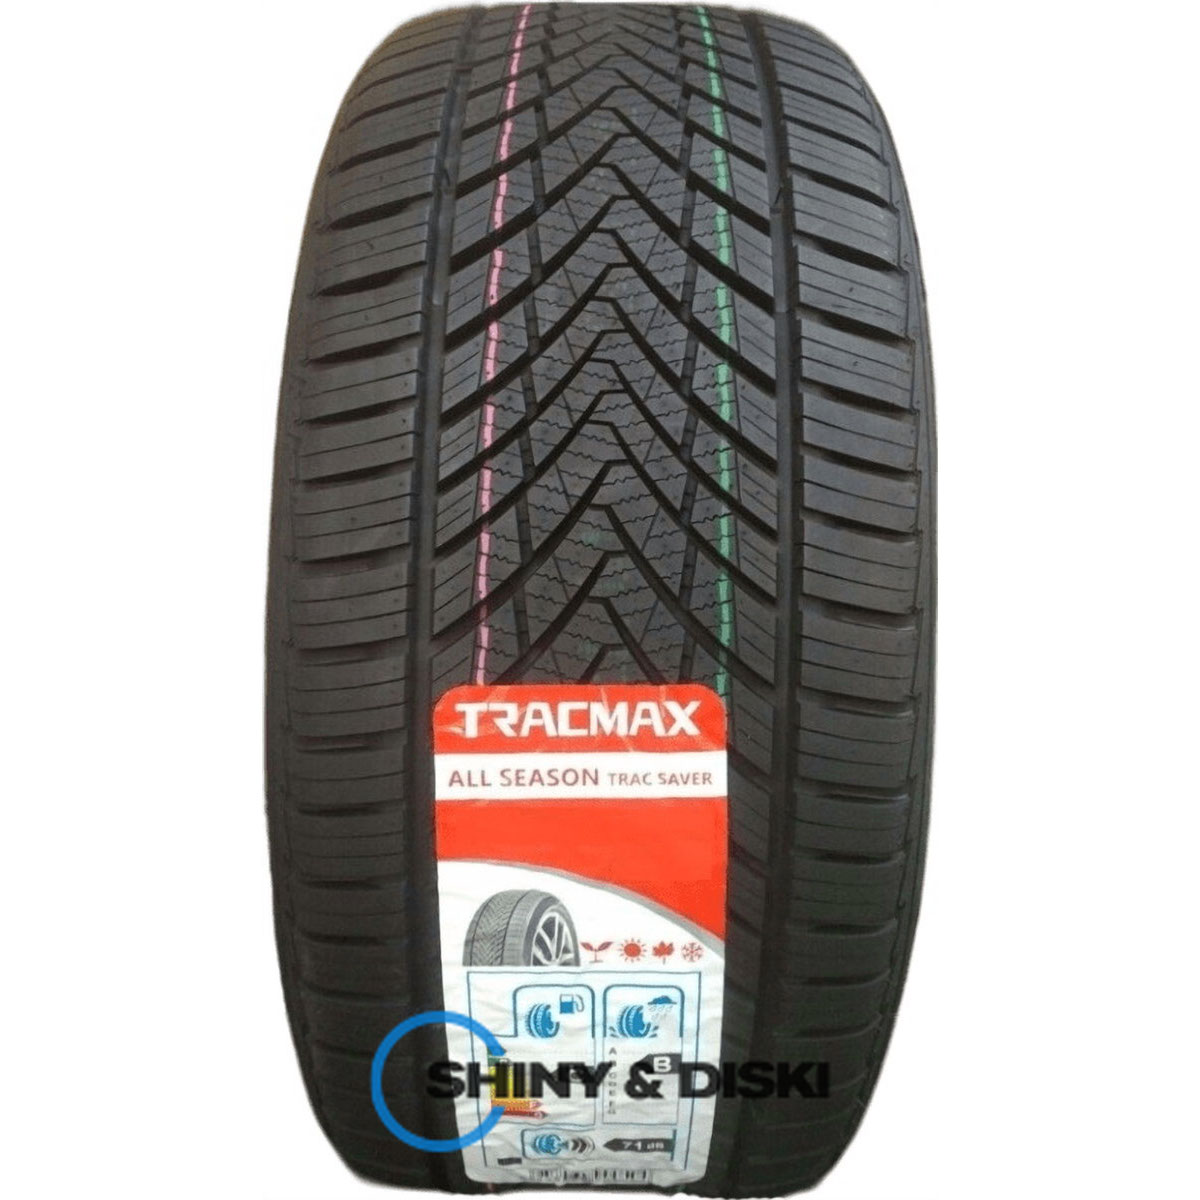 покрышки tracmax a/s trac saver 215/65 r17 99v